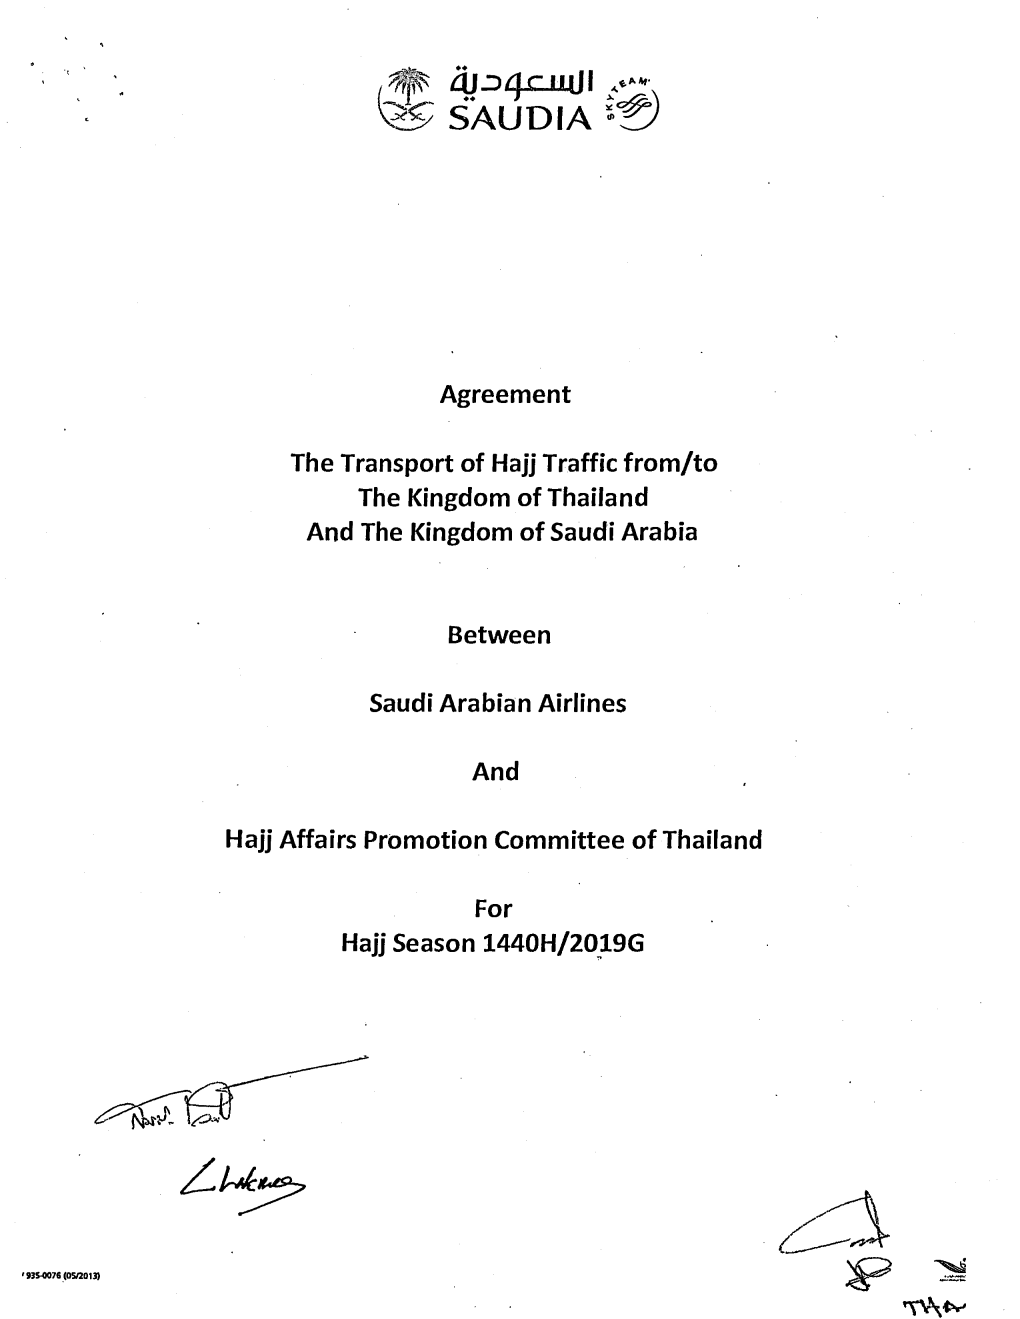 Agreement the Transport of Hajj Traffic From/To the Kingdom Of